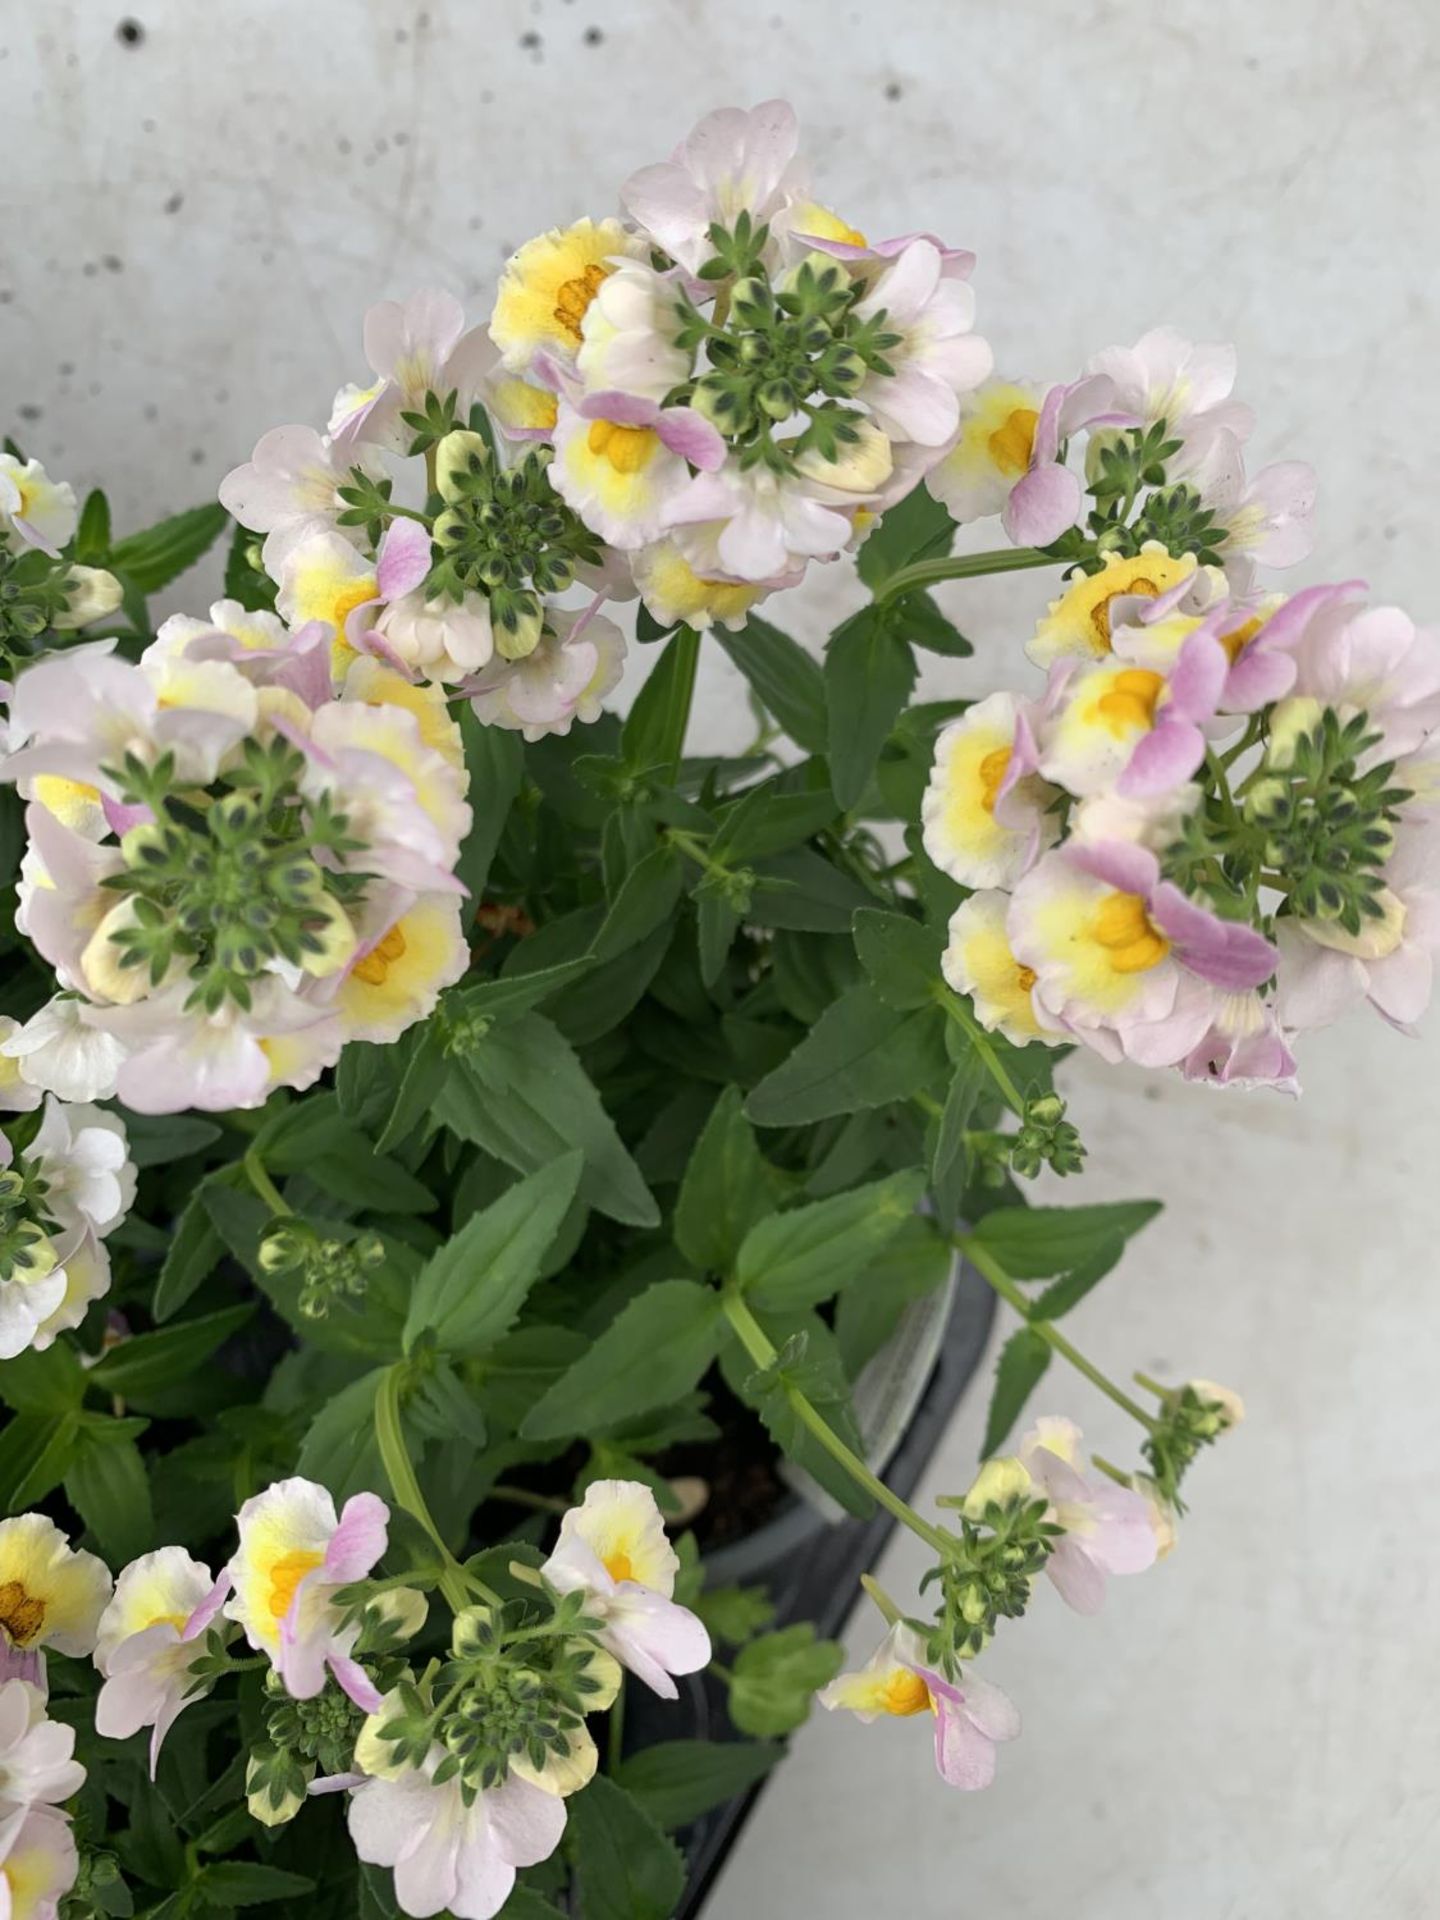 FIFTEEN NEMESIA SUNDAE 'LAVENDER SHERBET' ON A TRAY PLUS VAT TO BE SOLD FOR THE 15 - Image 5 of 5